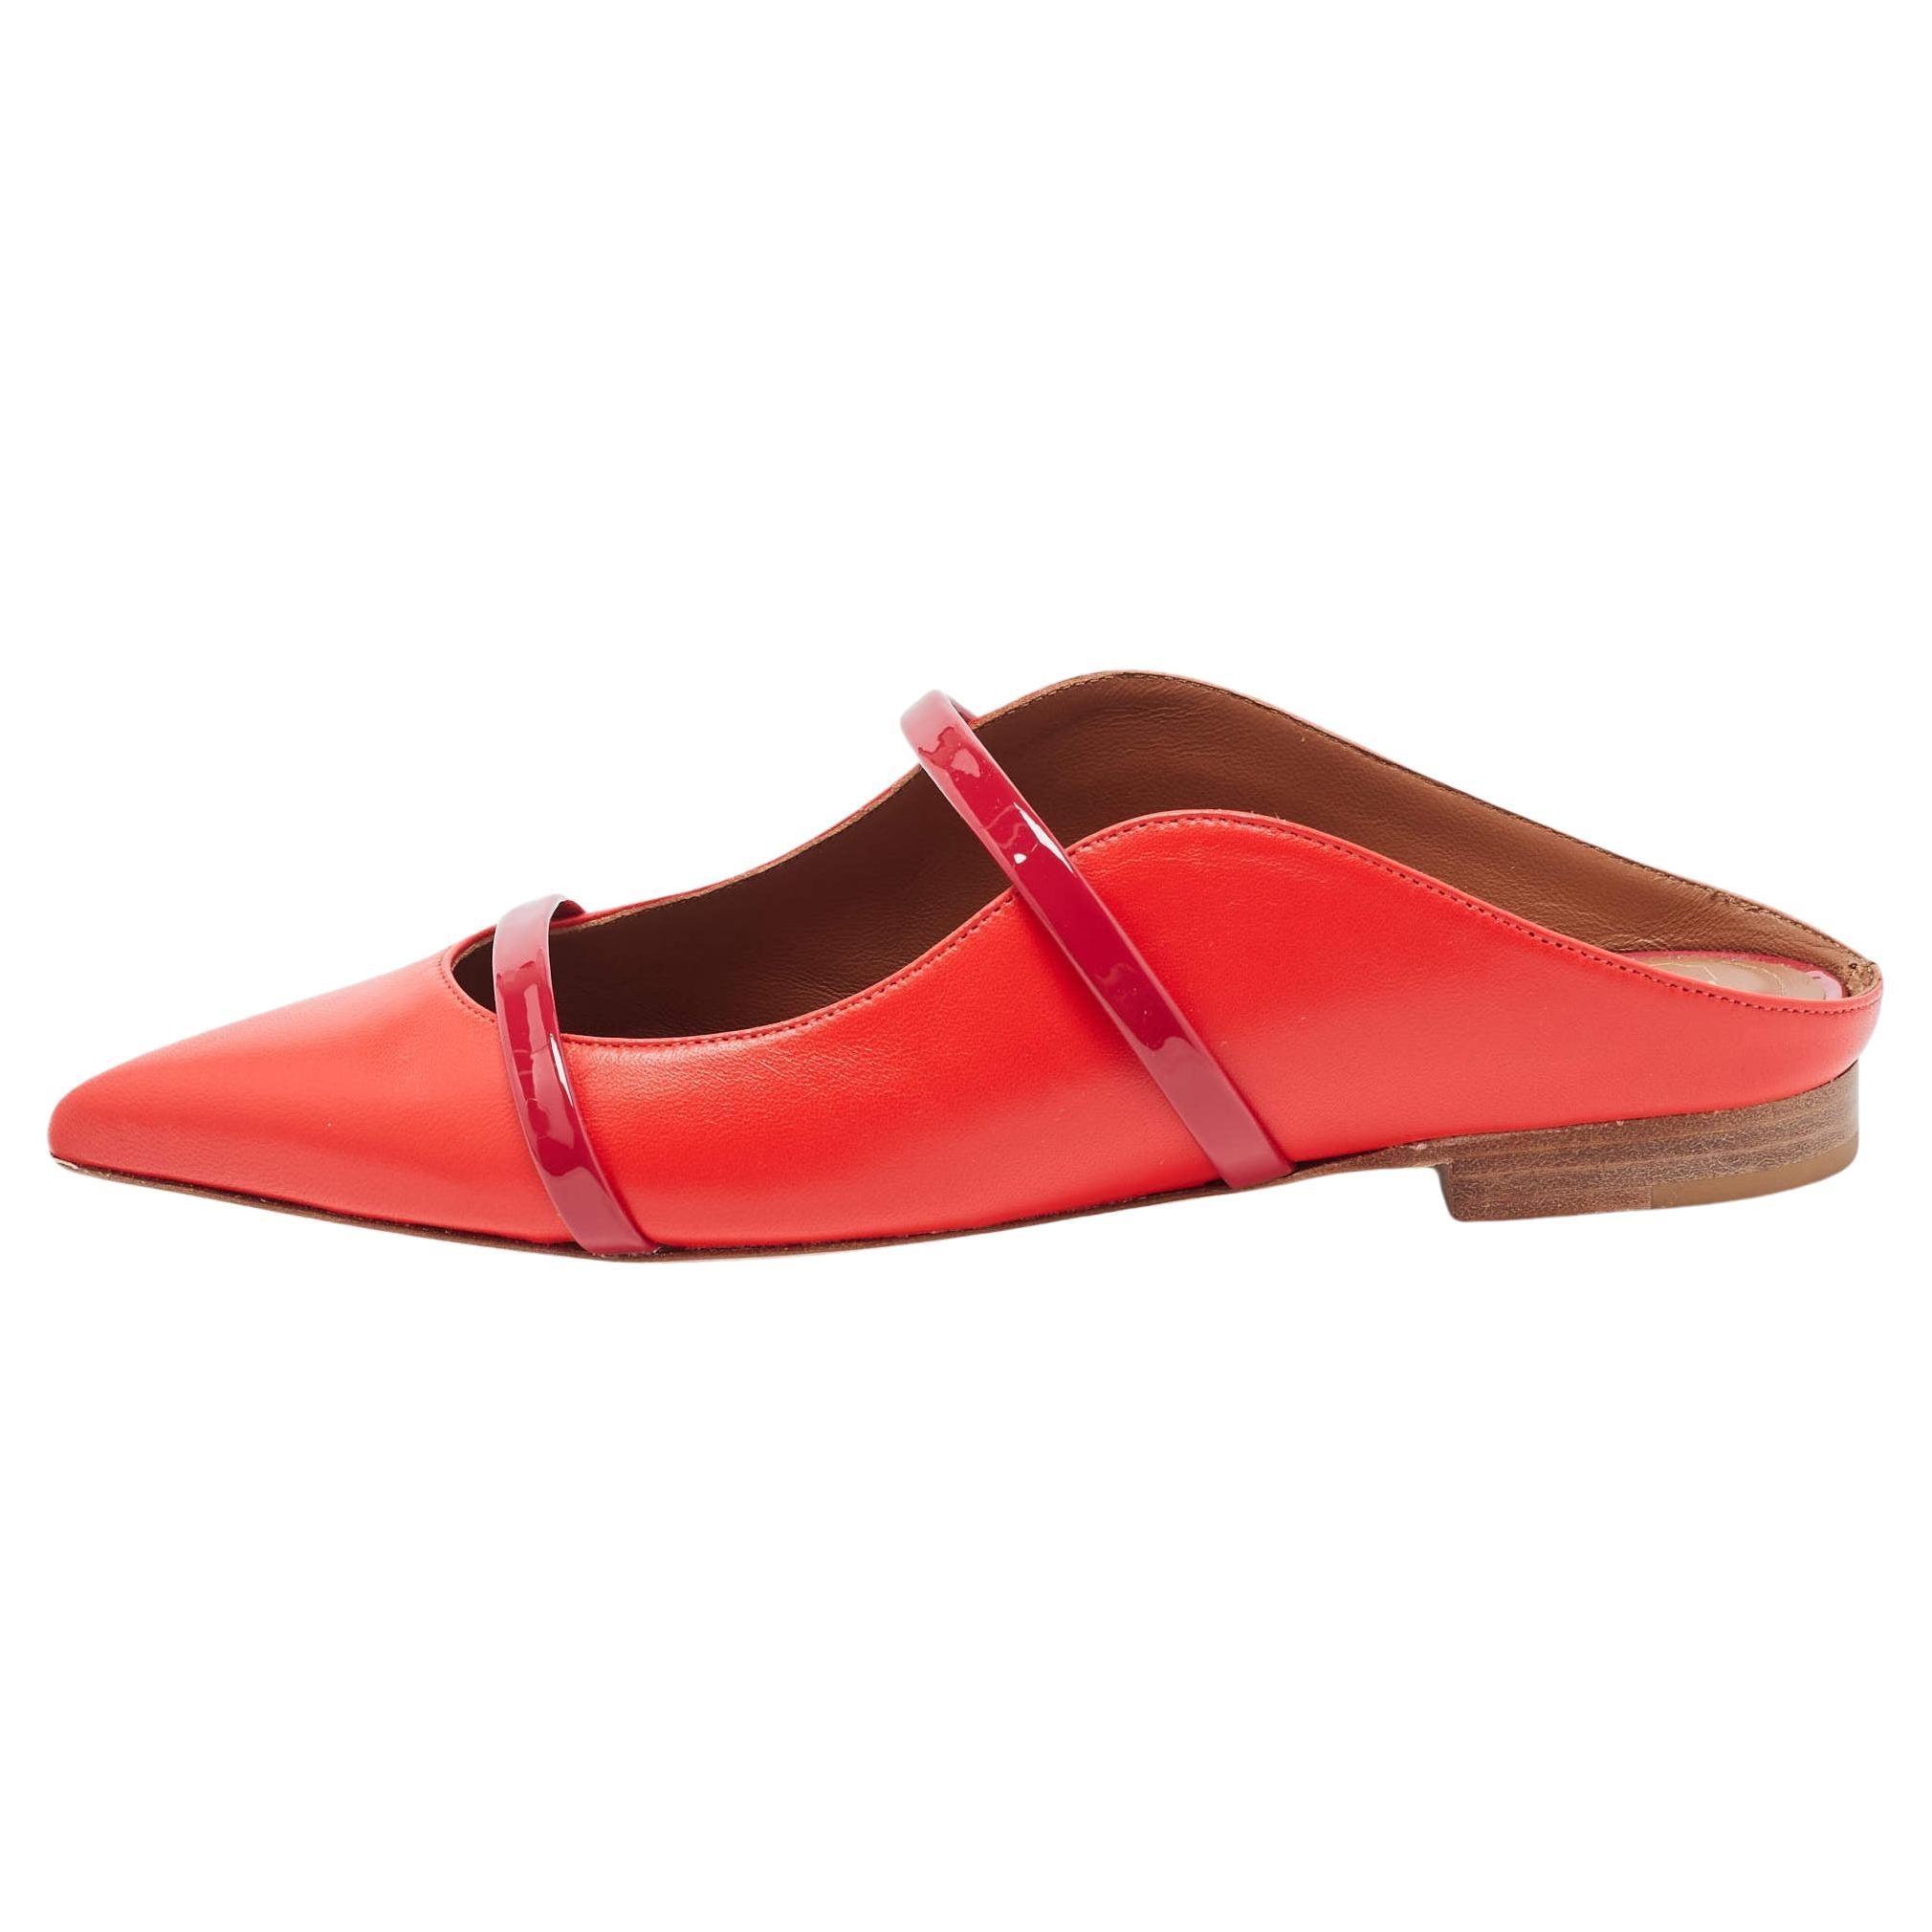 Malone Souliers Red Leather Maureen Flat Mules Size 36 For Sale